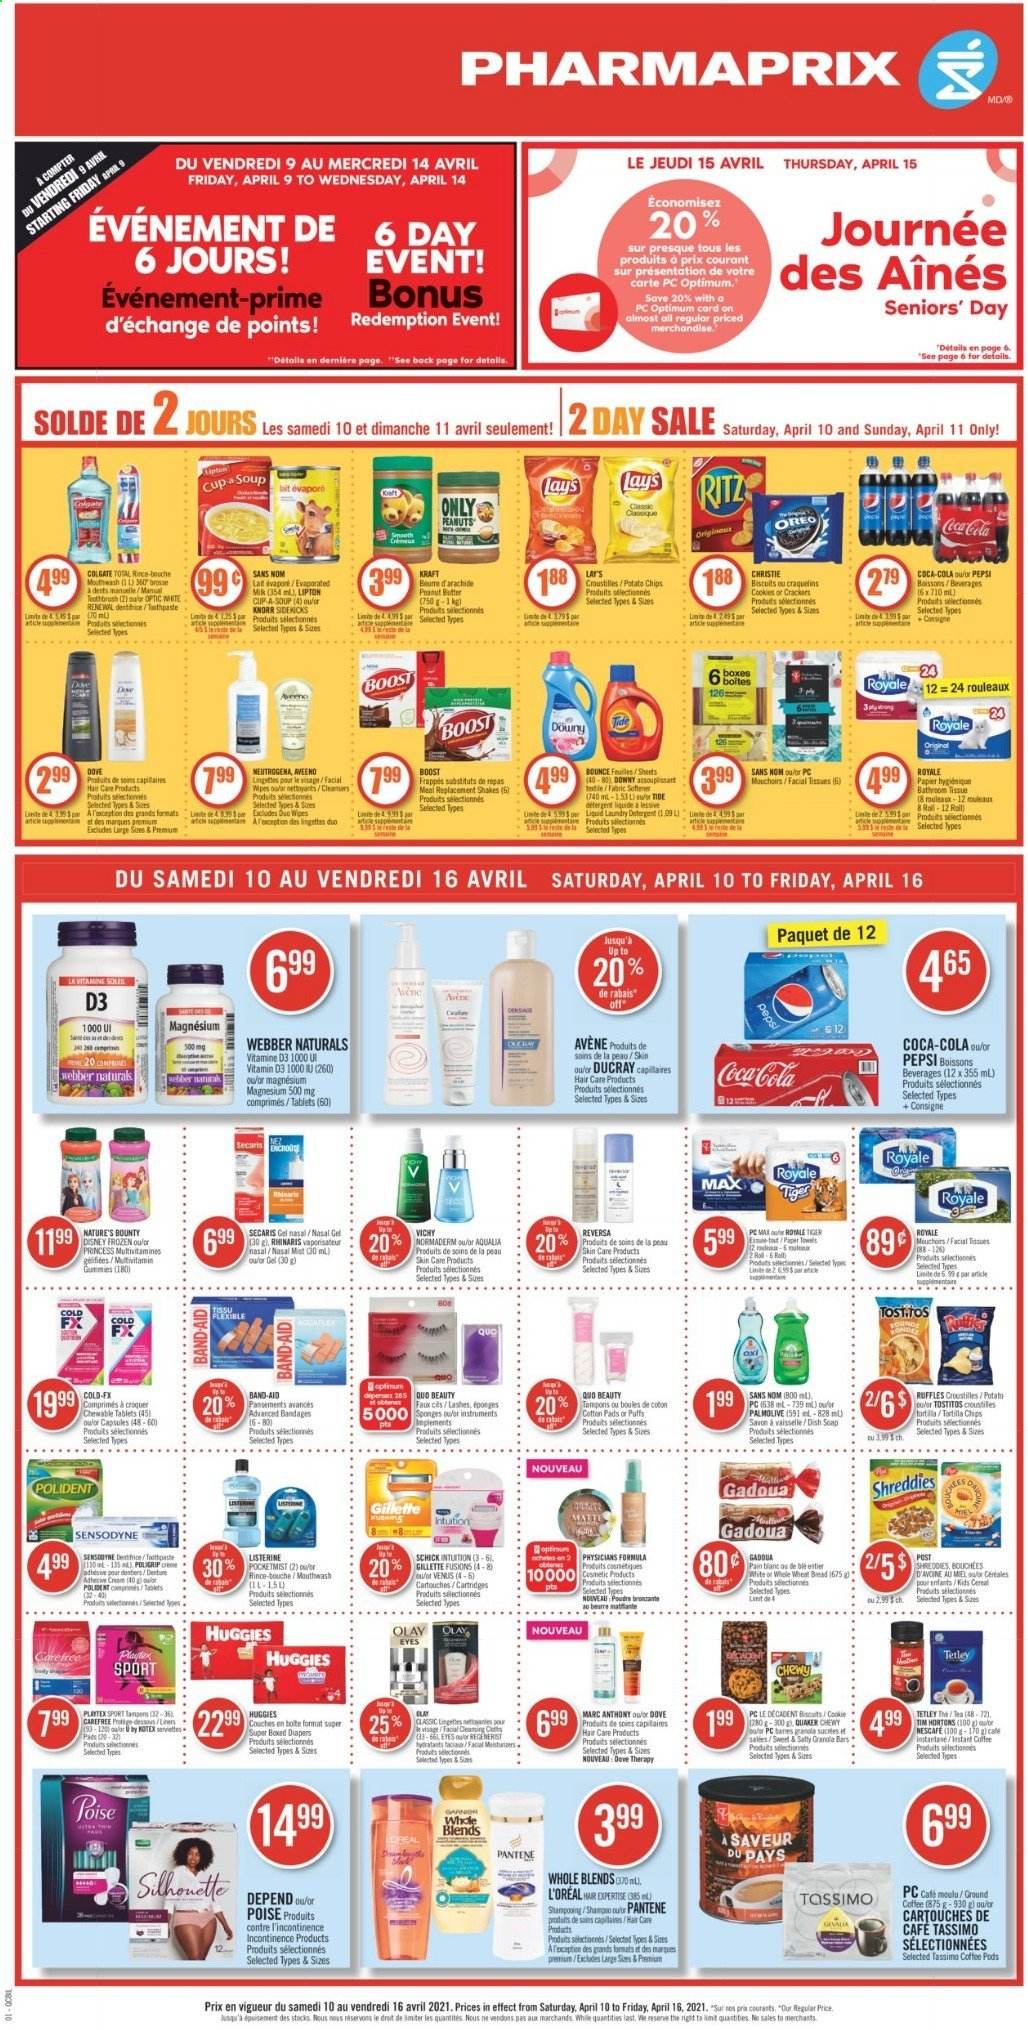 thumbnail - Pharmaprix Flyer - April 10, 2021 - April 16, 2021 - Sales products - wheat bread, puffs, soup, Quaker, Kraft®, Disney, shake, cookies, crackers, biscuit, RITZ, tortilla chips, potato chips, Lay’s, Ruffles, Tostitos, cereals, peanut butter, peanuts, Coca-Cola, Pepsi, Boost, coffee pods, ground coffee, wipes, nappies, Aveeno, tissues, Tide, fabric softener, laundry detergent, Vichy, soap, toothbrush, mouthwash, Polident, Playtex, Carefree, Kotex, tampons, facial tissues, L’Oréal, Olay, Schick, Venus, cup, princess, magnesium, multivitamin, Nature's Bounty, vitamin D3, Knorr, Oreo, Gillette, granola, Listerine, Neutrogena, Huggies, Pantene, Sensodyne, Nescafé. Page 1.